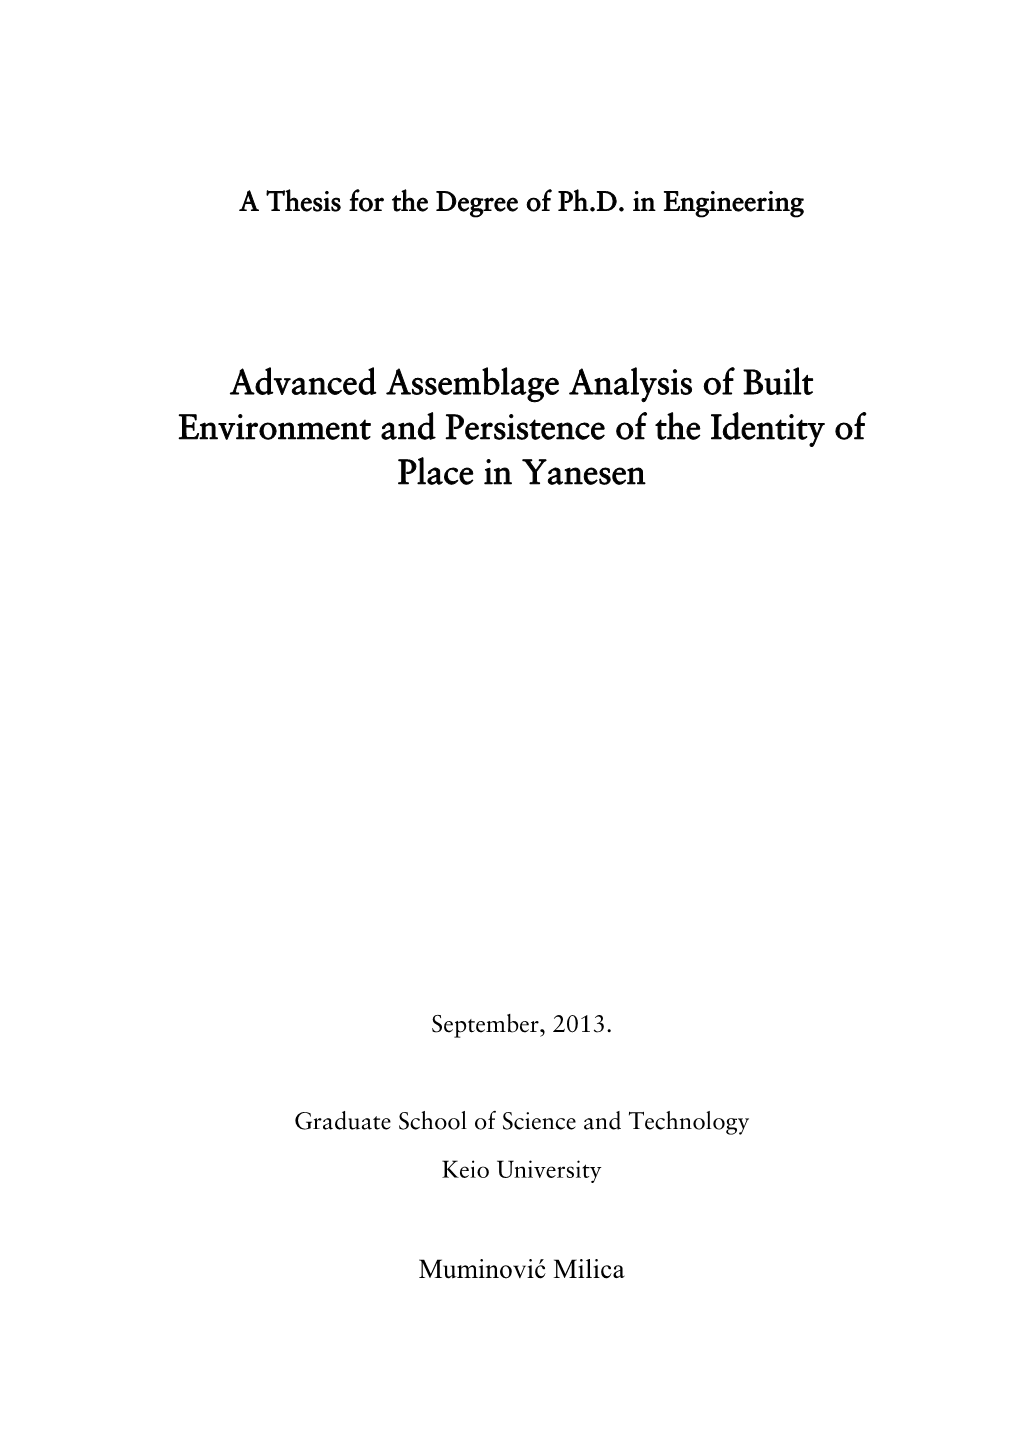 Advanced Assemblage Analysis of Built Environment and Persistence of the Identity of Place in Yanesen